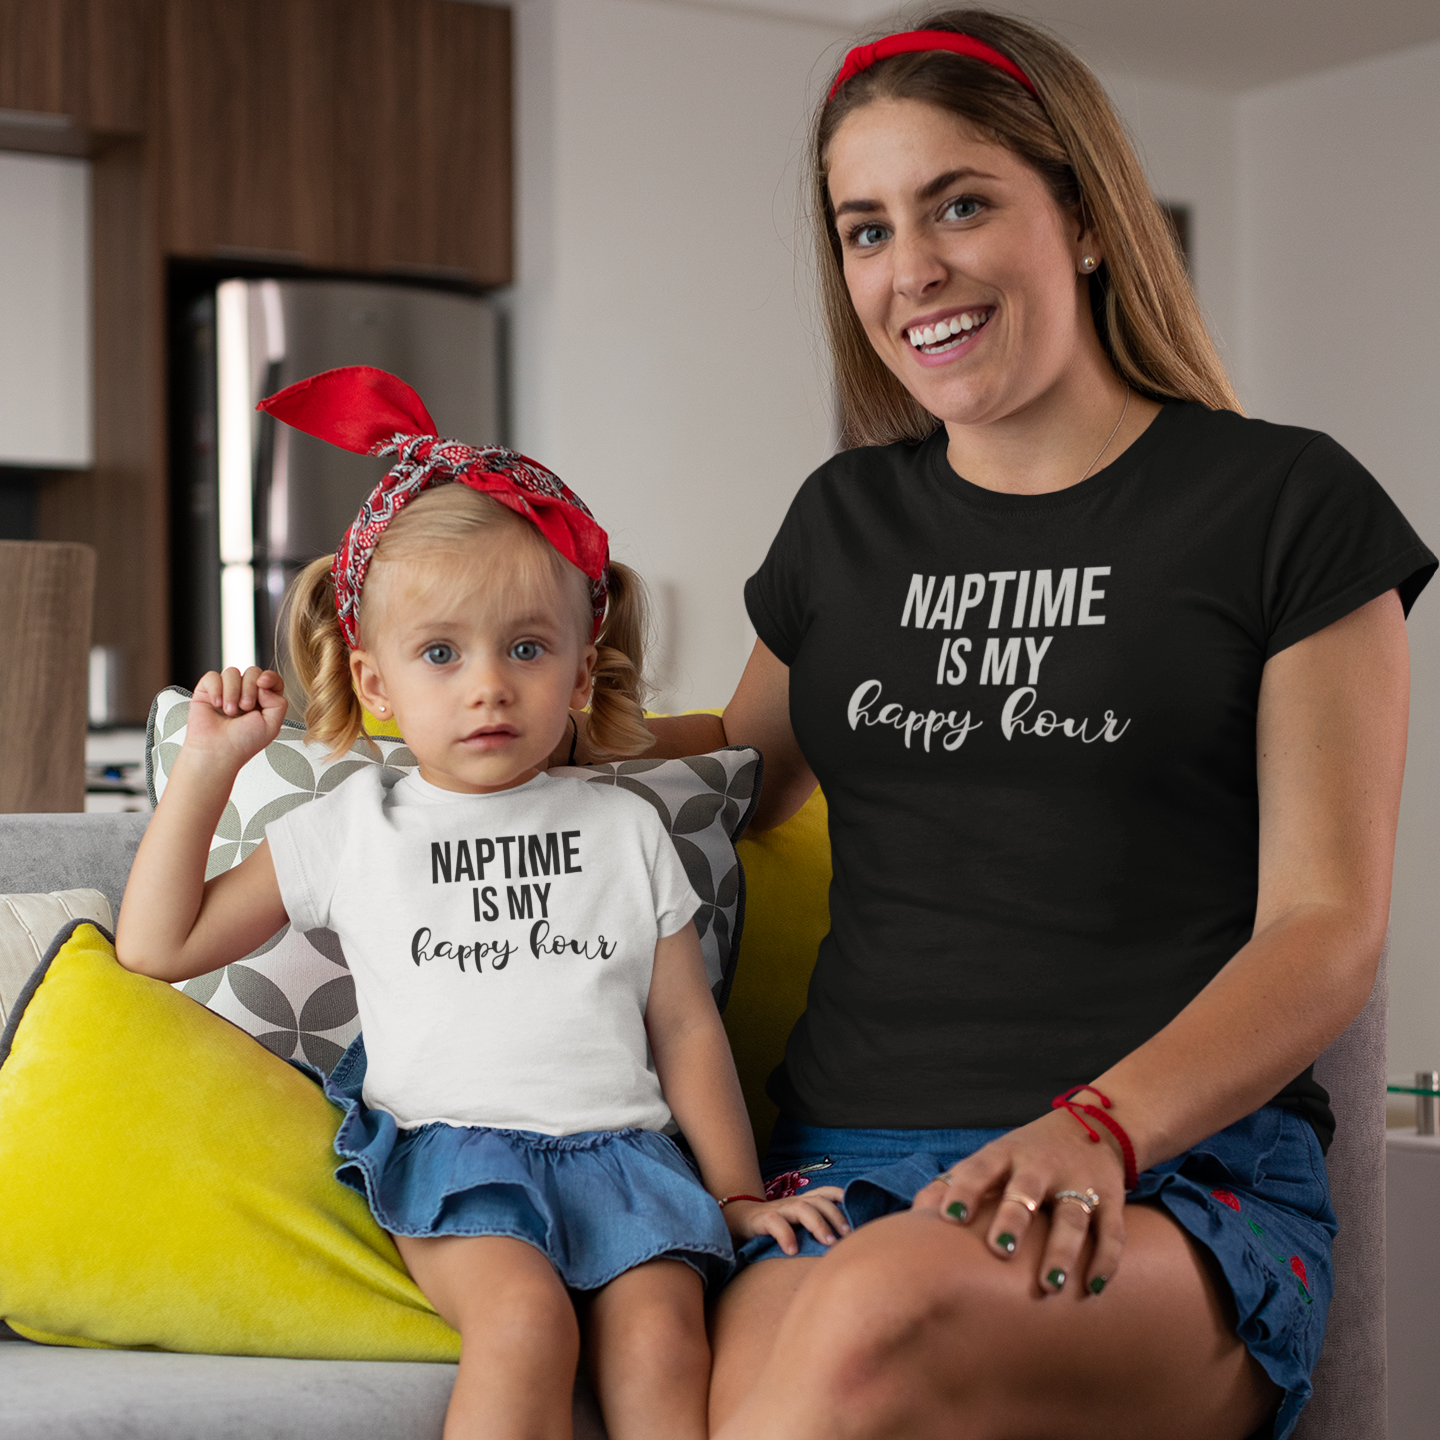 'Naptime is my happy hour' adult shirt